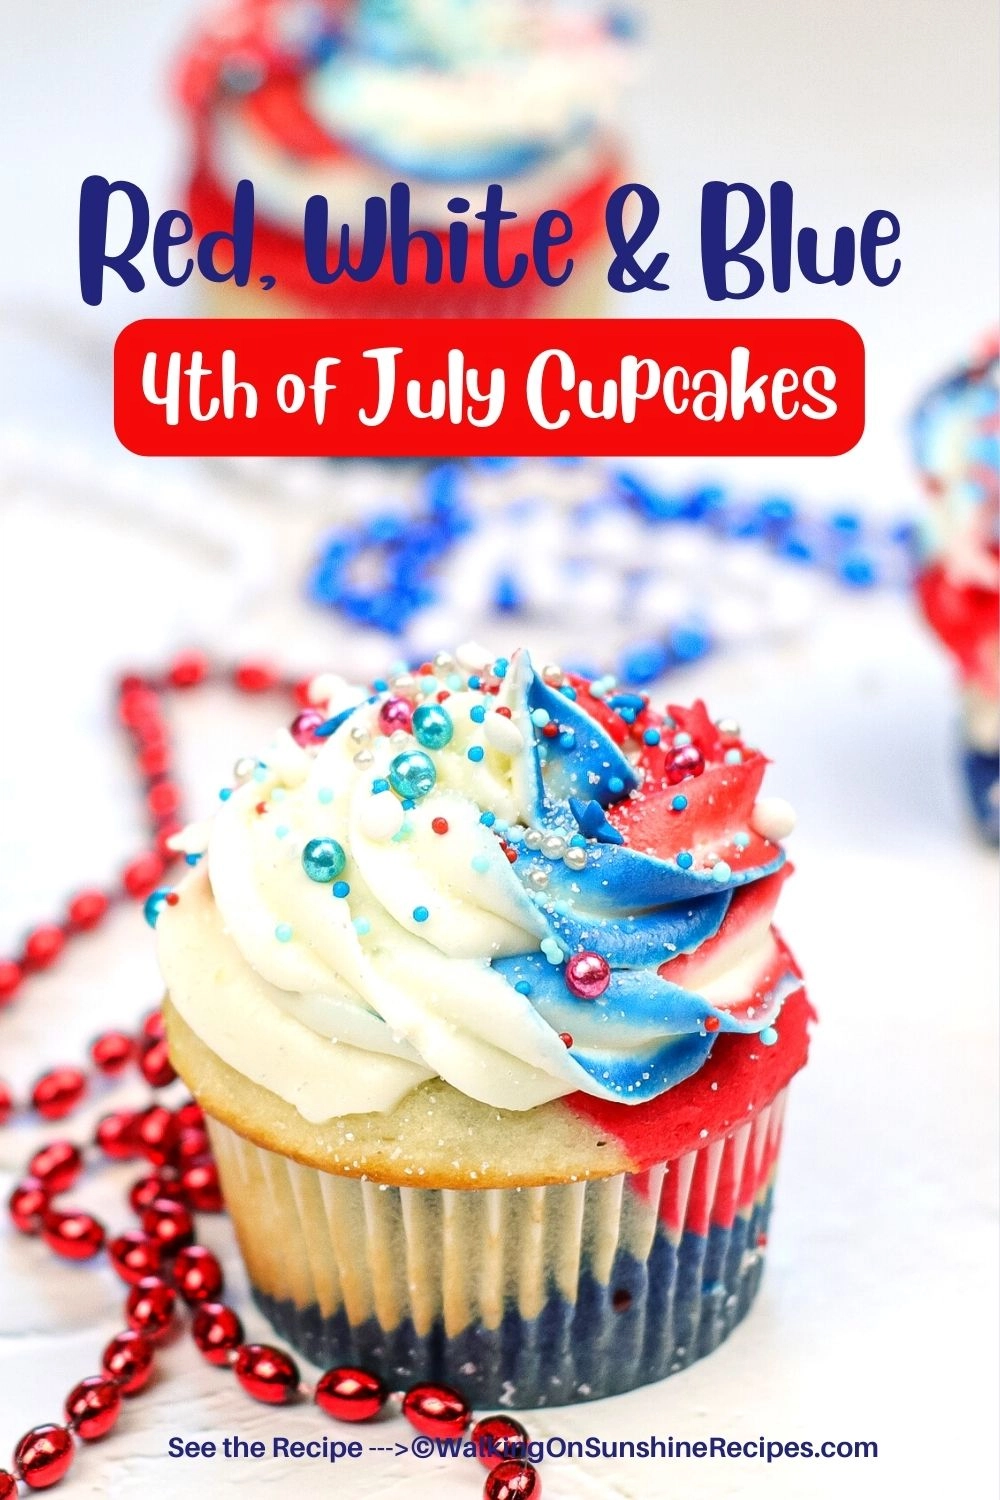 Red white and blue cake cupcakes.